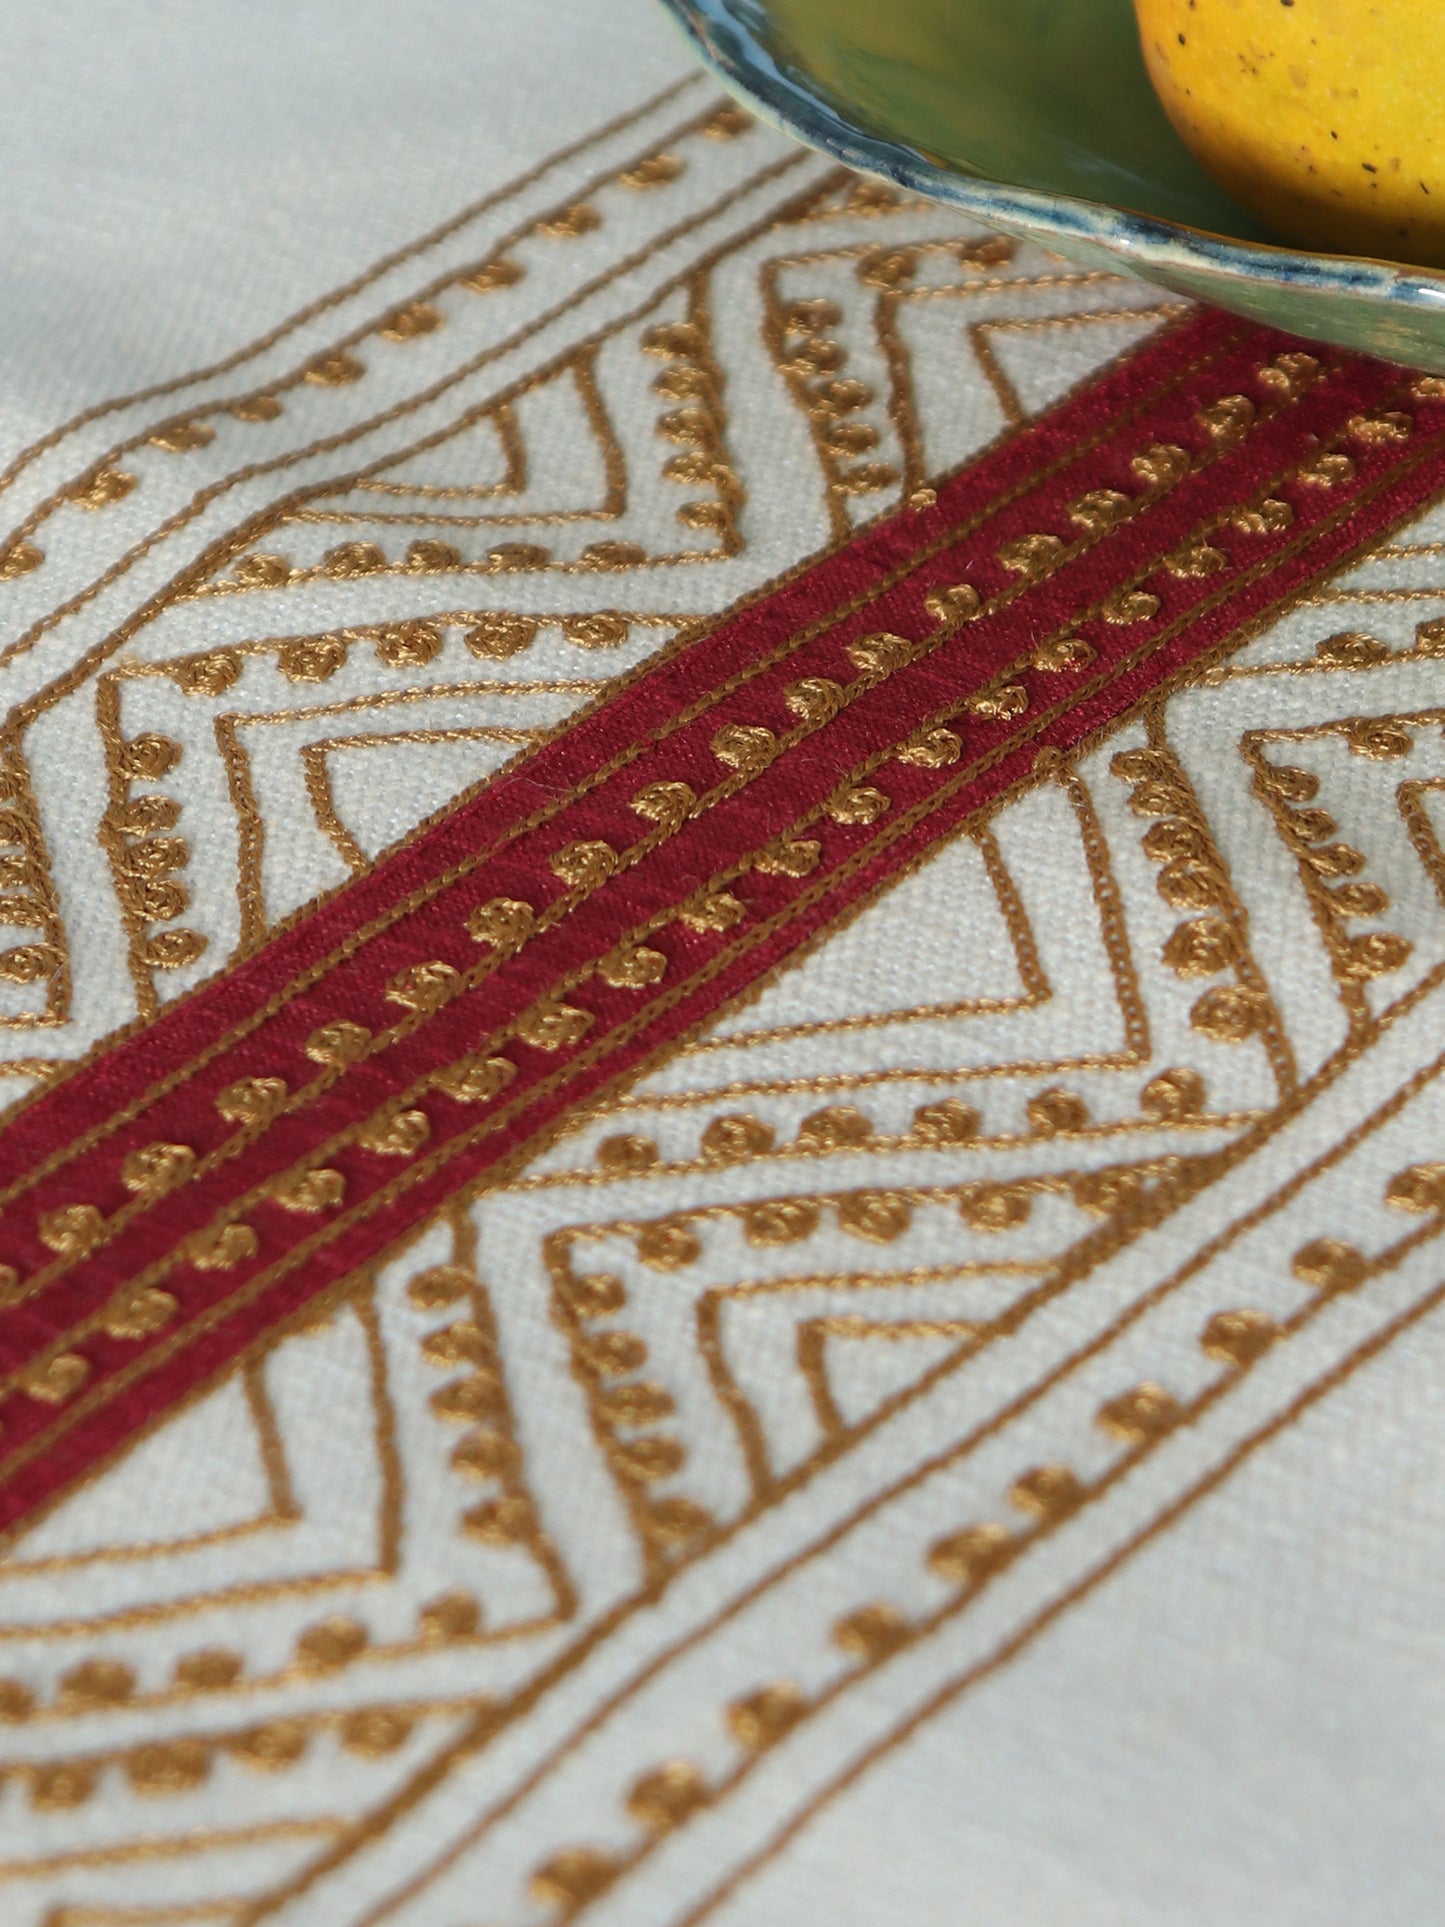 closeup of embroidery on beige colored table runner with red patch in center and golden embroidery and tassels on corners for 6 seater table - 52x84 inches.